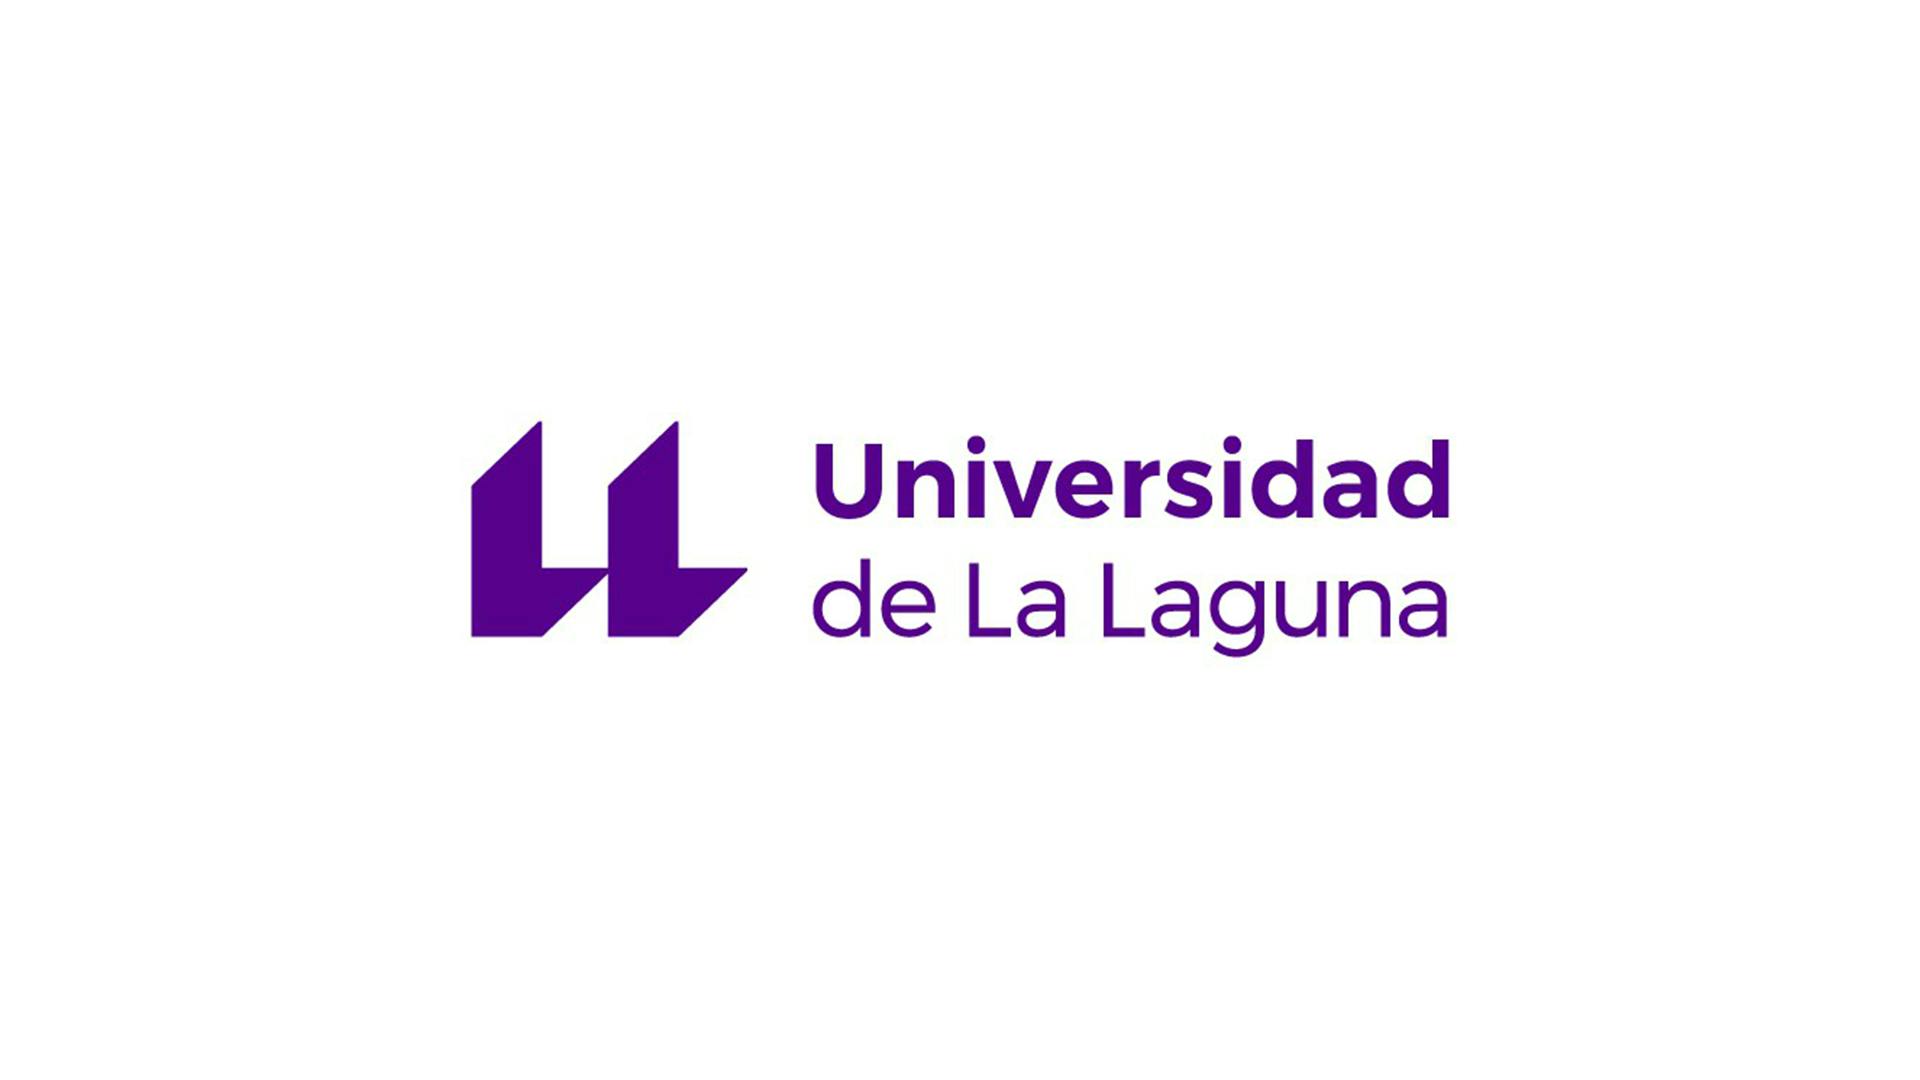 Logo of the University of La Laguna: two side-by-side "L's" resembling two open quotation marks, with the words "Universidad de La Laguna" next to them.